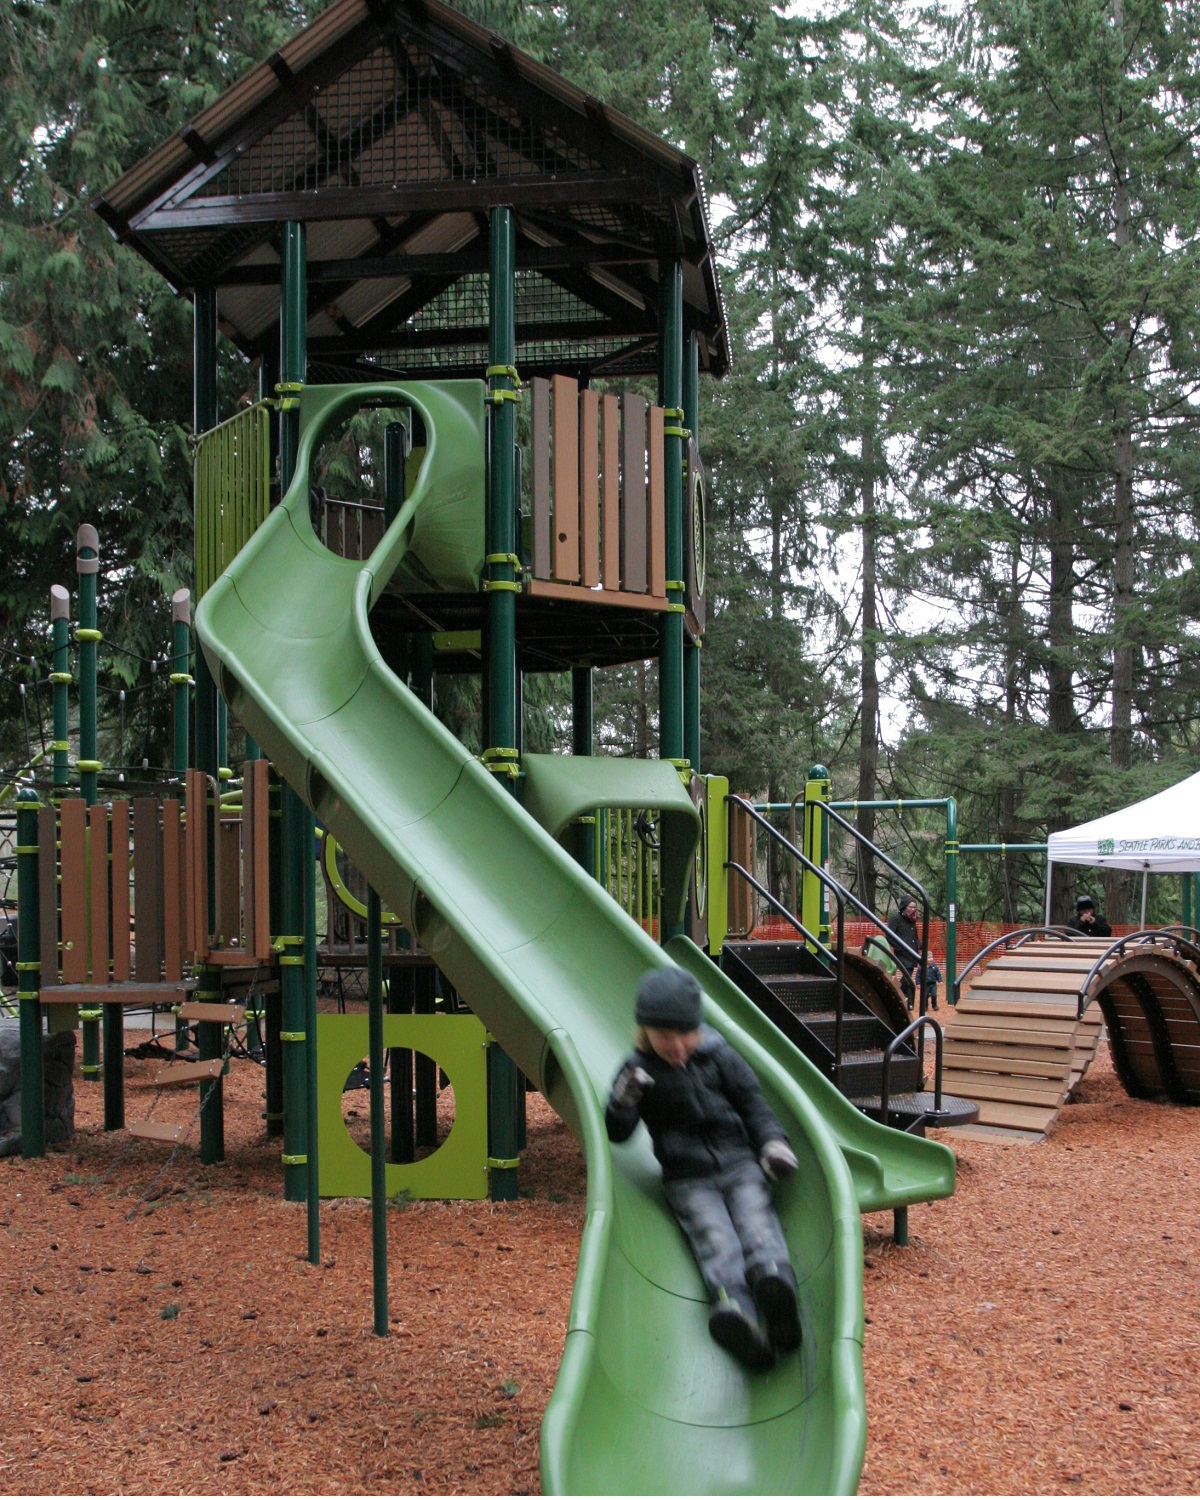 Youngster sliding down long green slide at new play area